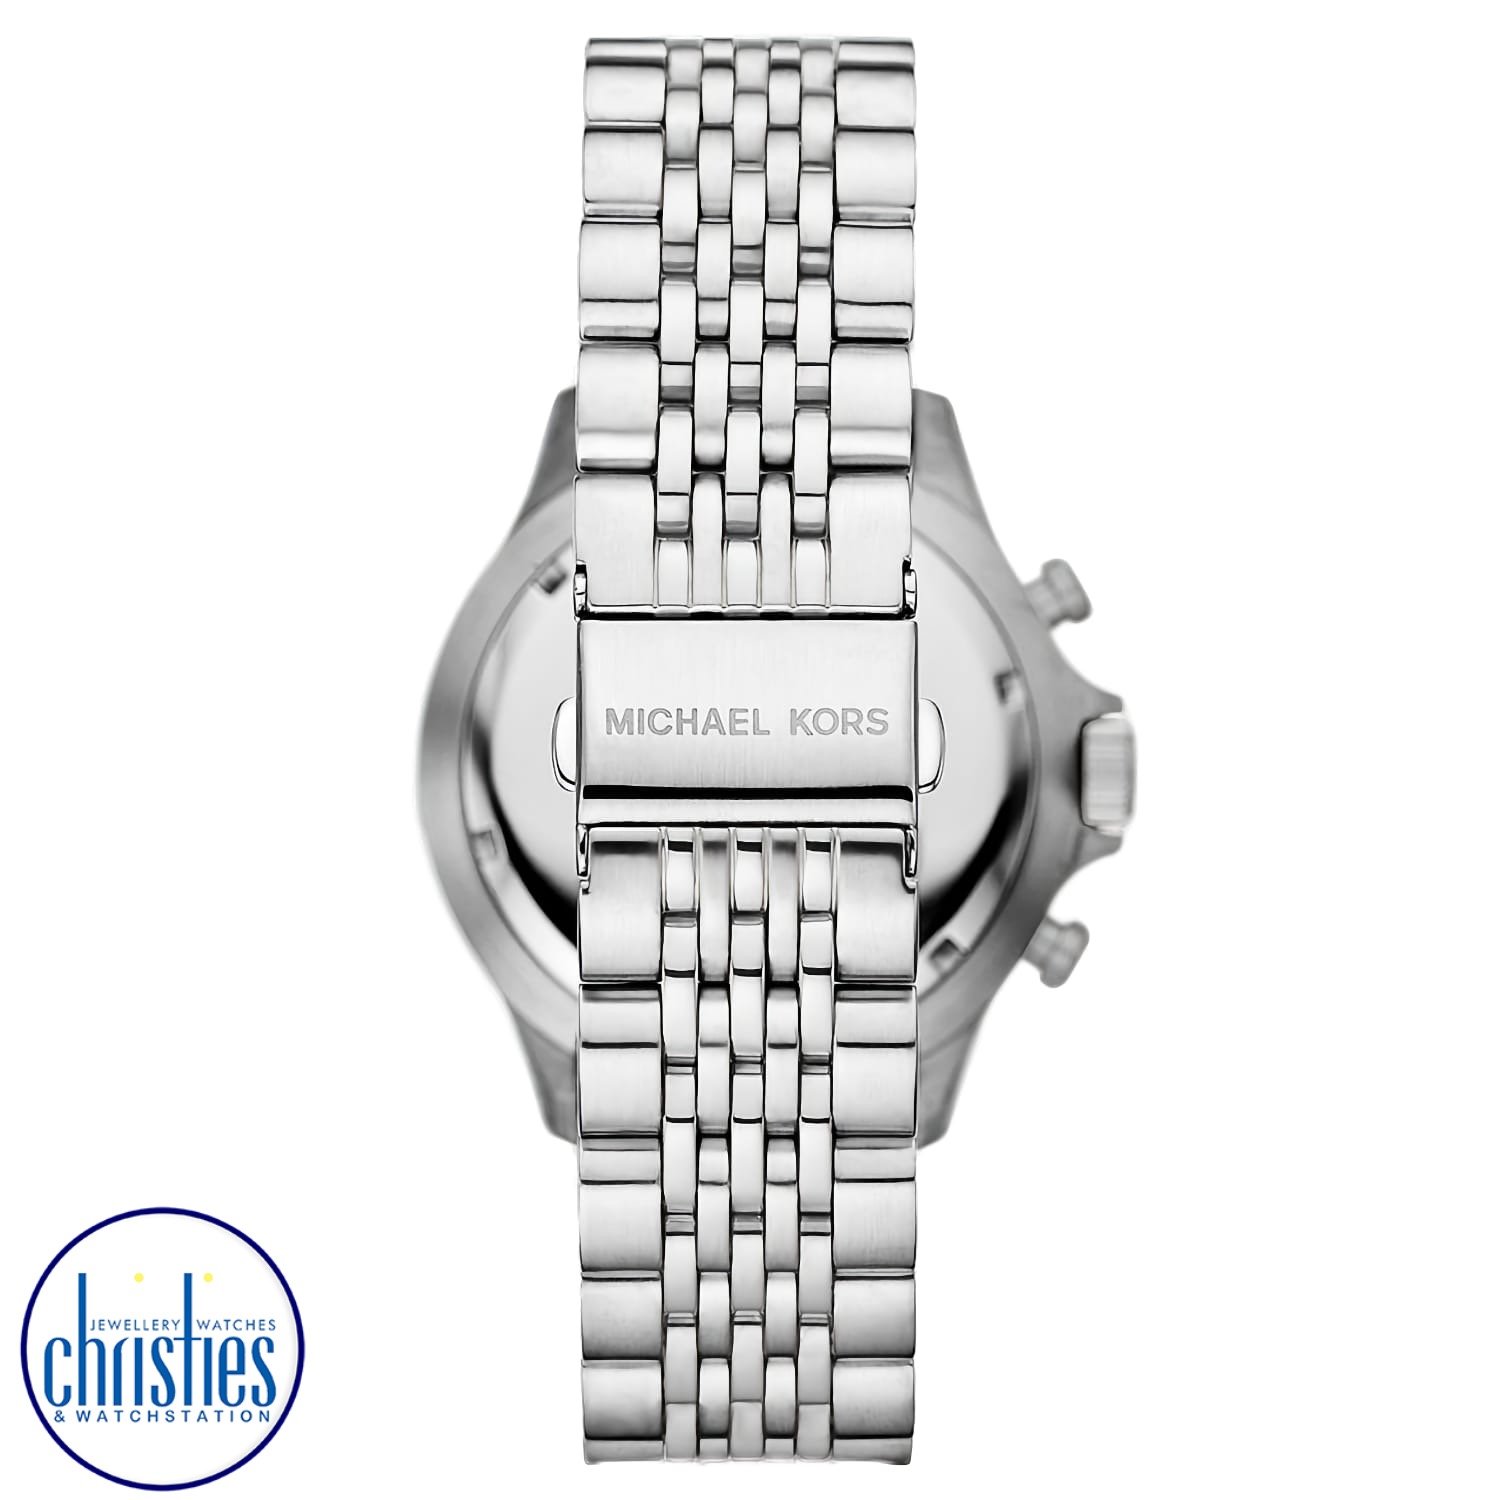 MK8896 Michael Kors Bradshaw Bayville Chronograph Watch. MK8896 Michael Kors Bradshaw Bayville Chronograph Stainless Steel WatchAfterpay - Split your purchase into 4 instalments - Pay for your purchase over 4 instalments, due every two weeks.